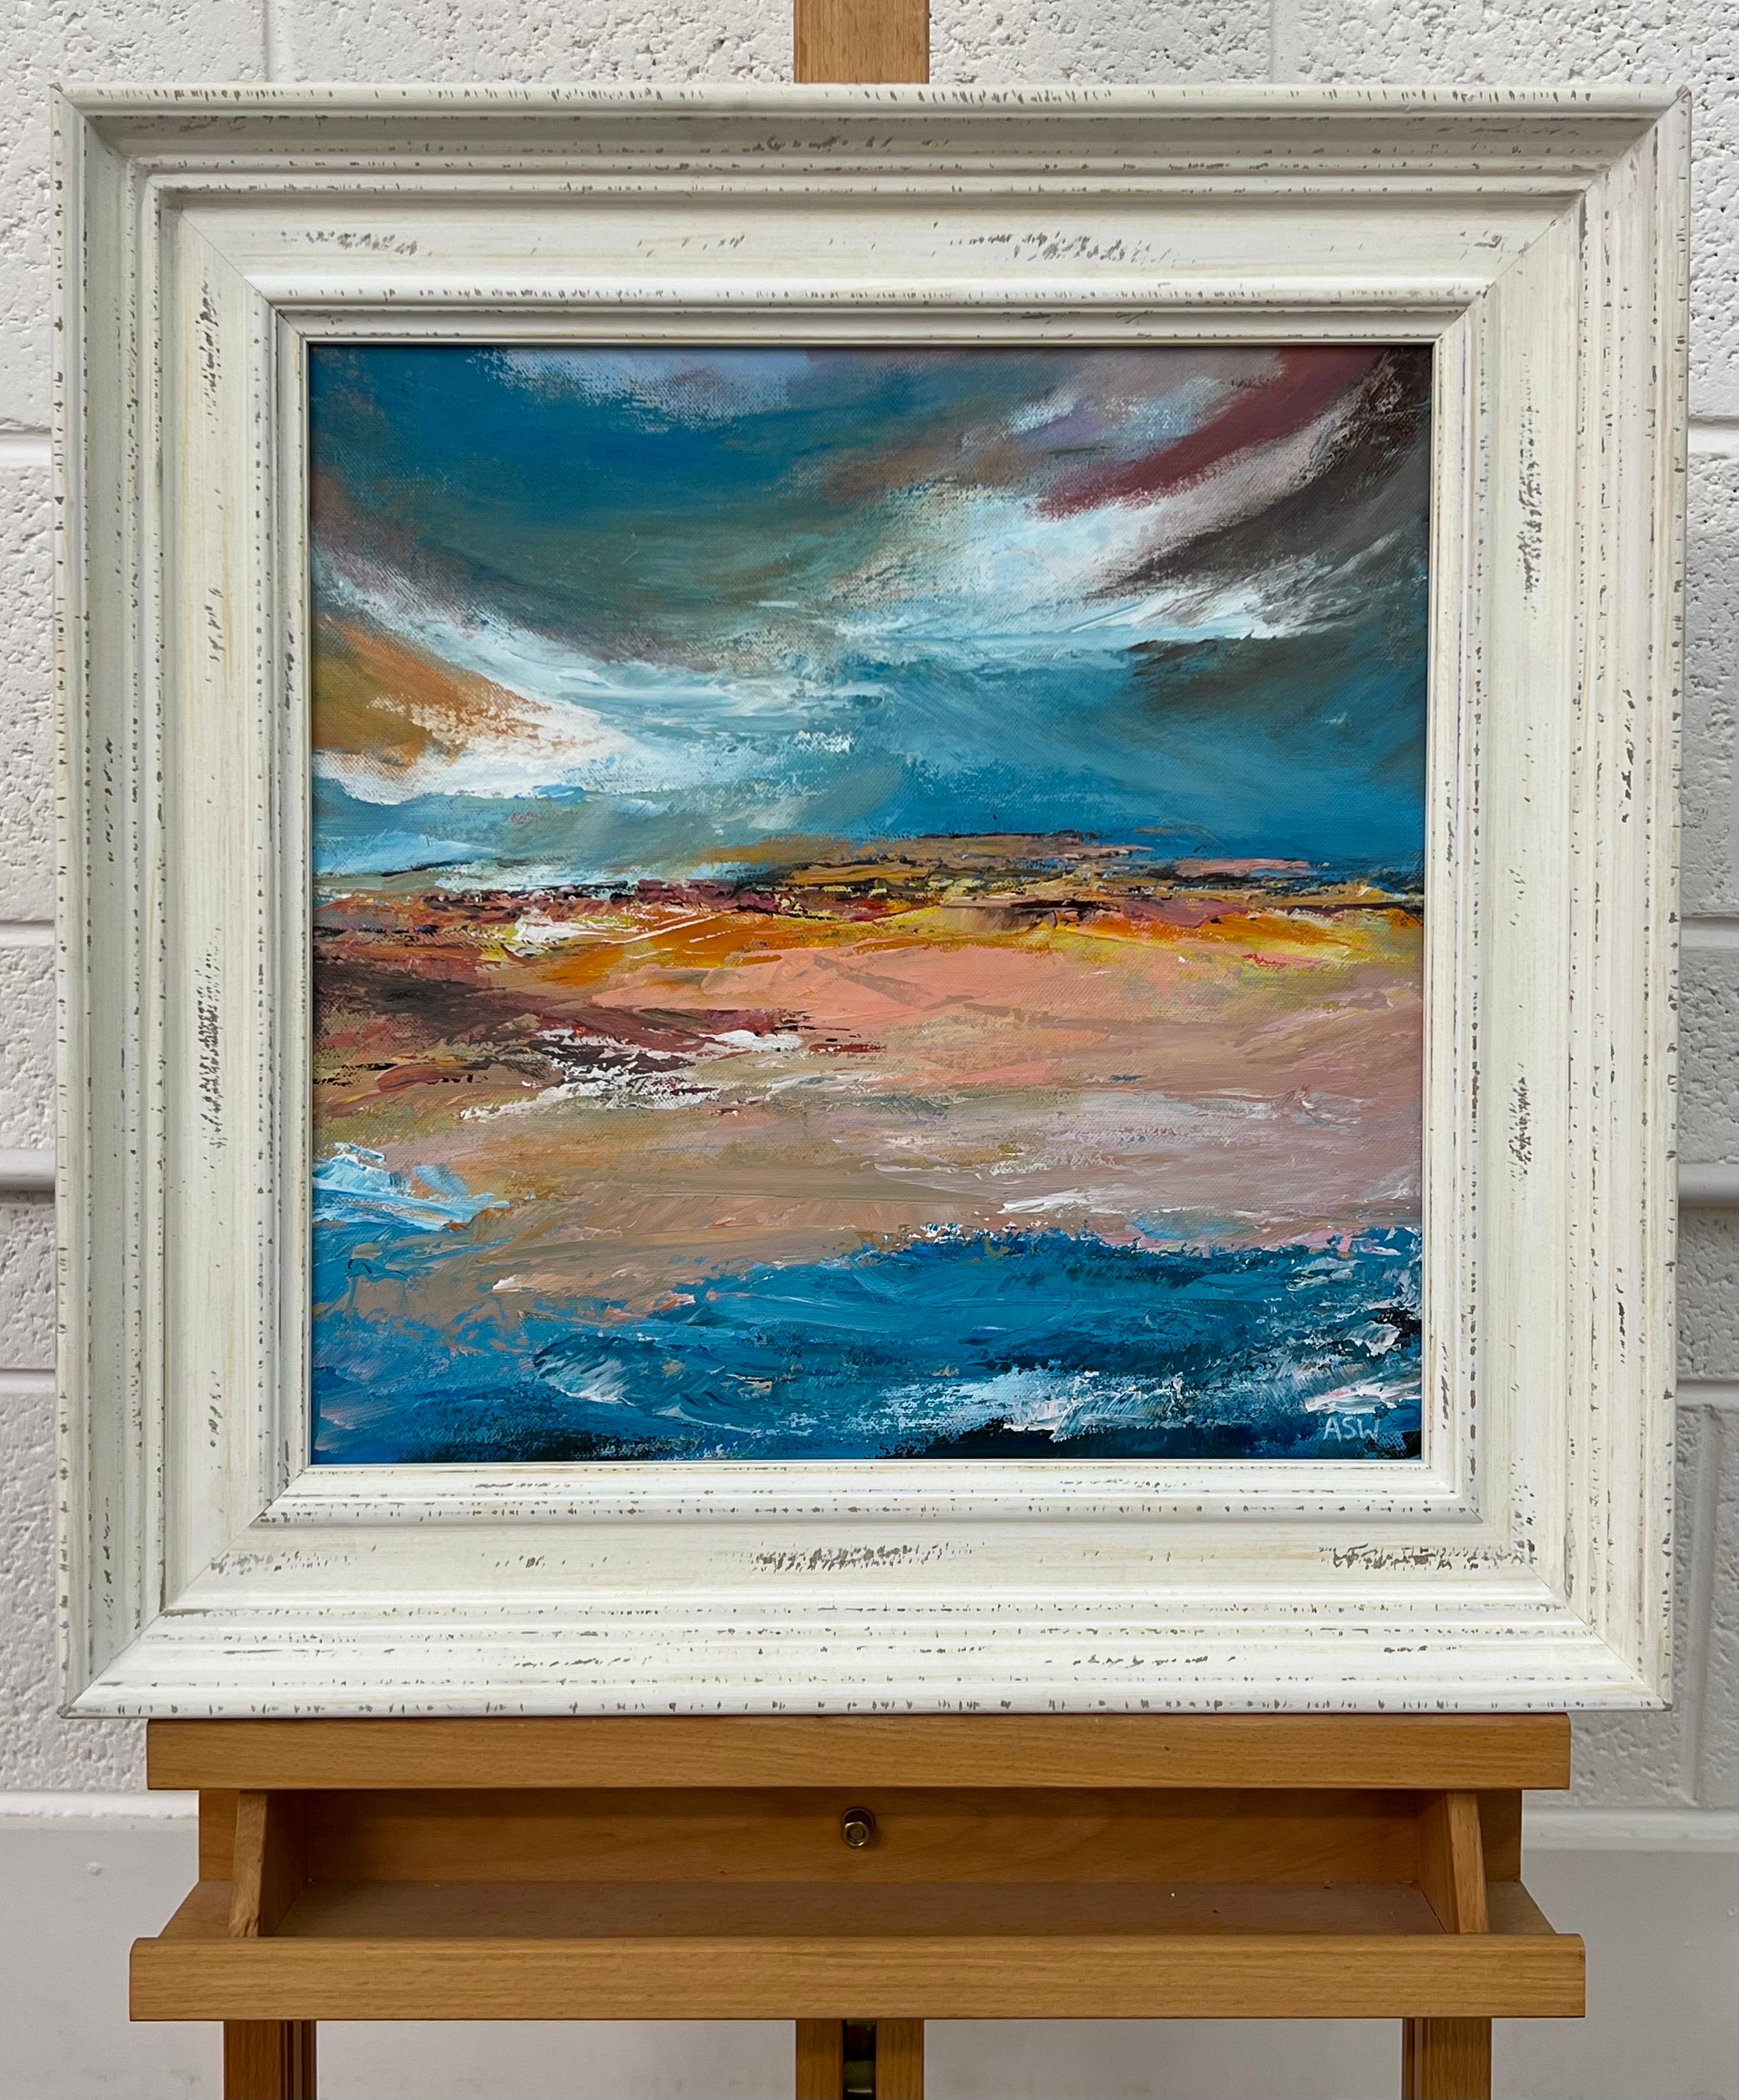 Expressive Abstract Seascape Landscape Painting by Contemporary British Artist For Sale 3